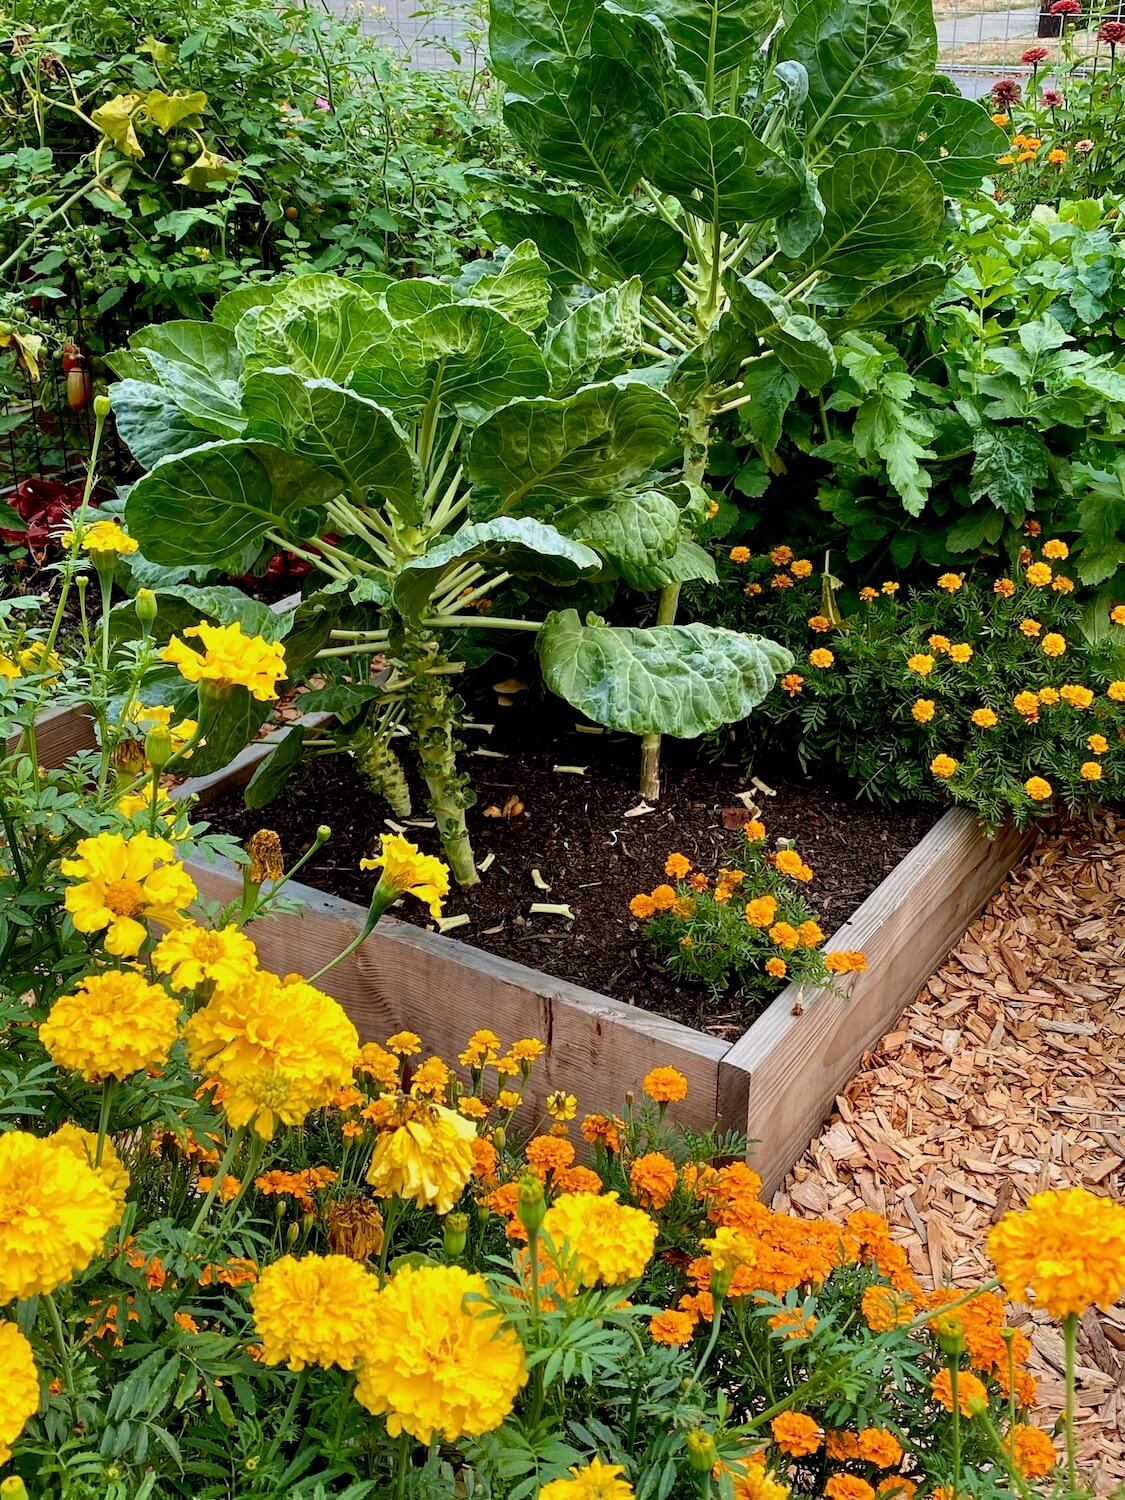 Planter boxes of a P-Patch garden hold a variety of colorful treasures, including yellow marigolds in the foreground and rising kale plants in the background. There is sawdust chips on the ground space between the raised planter beds.